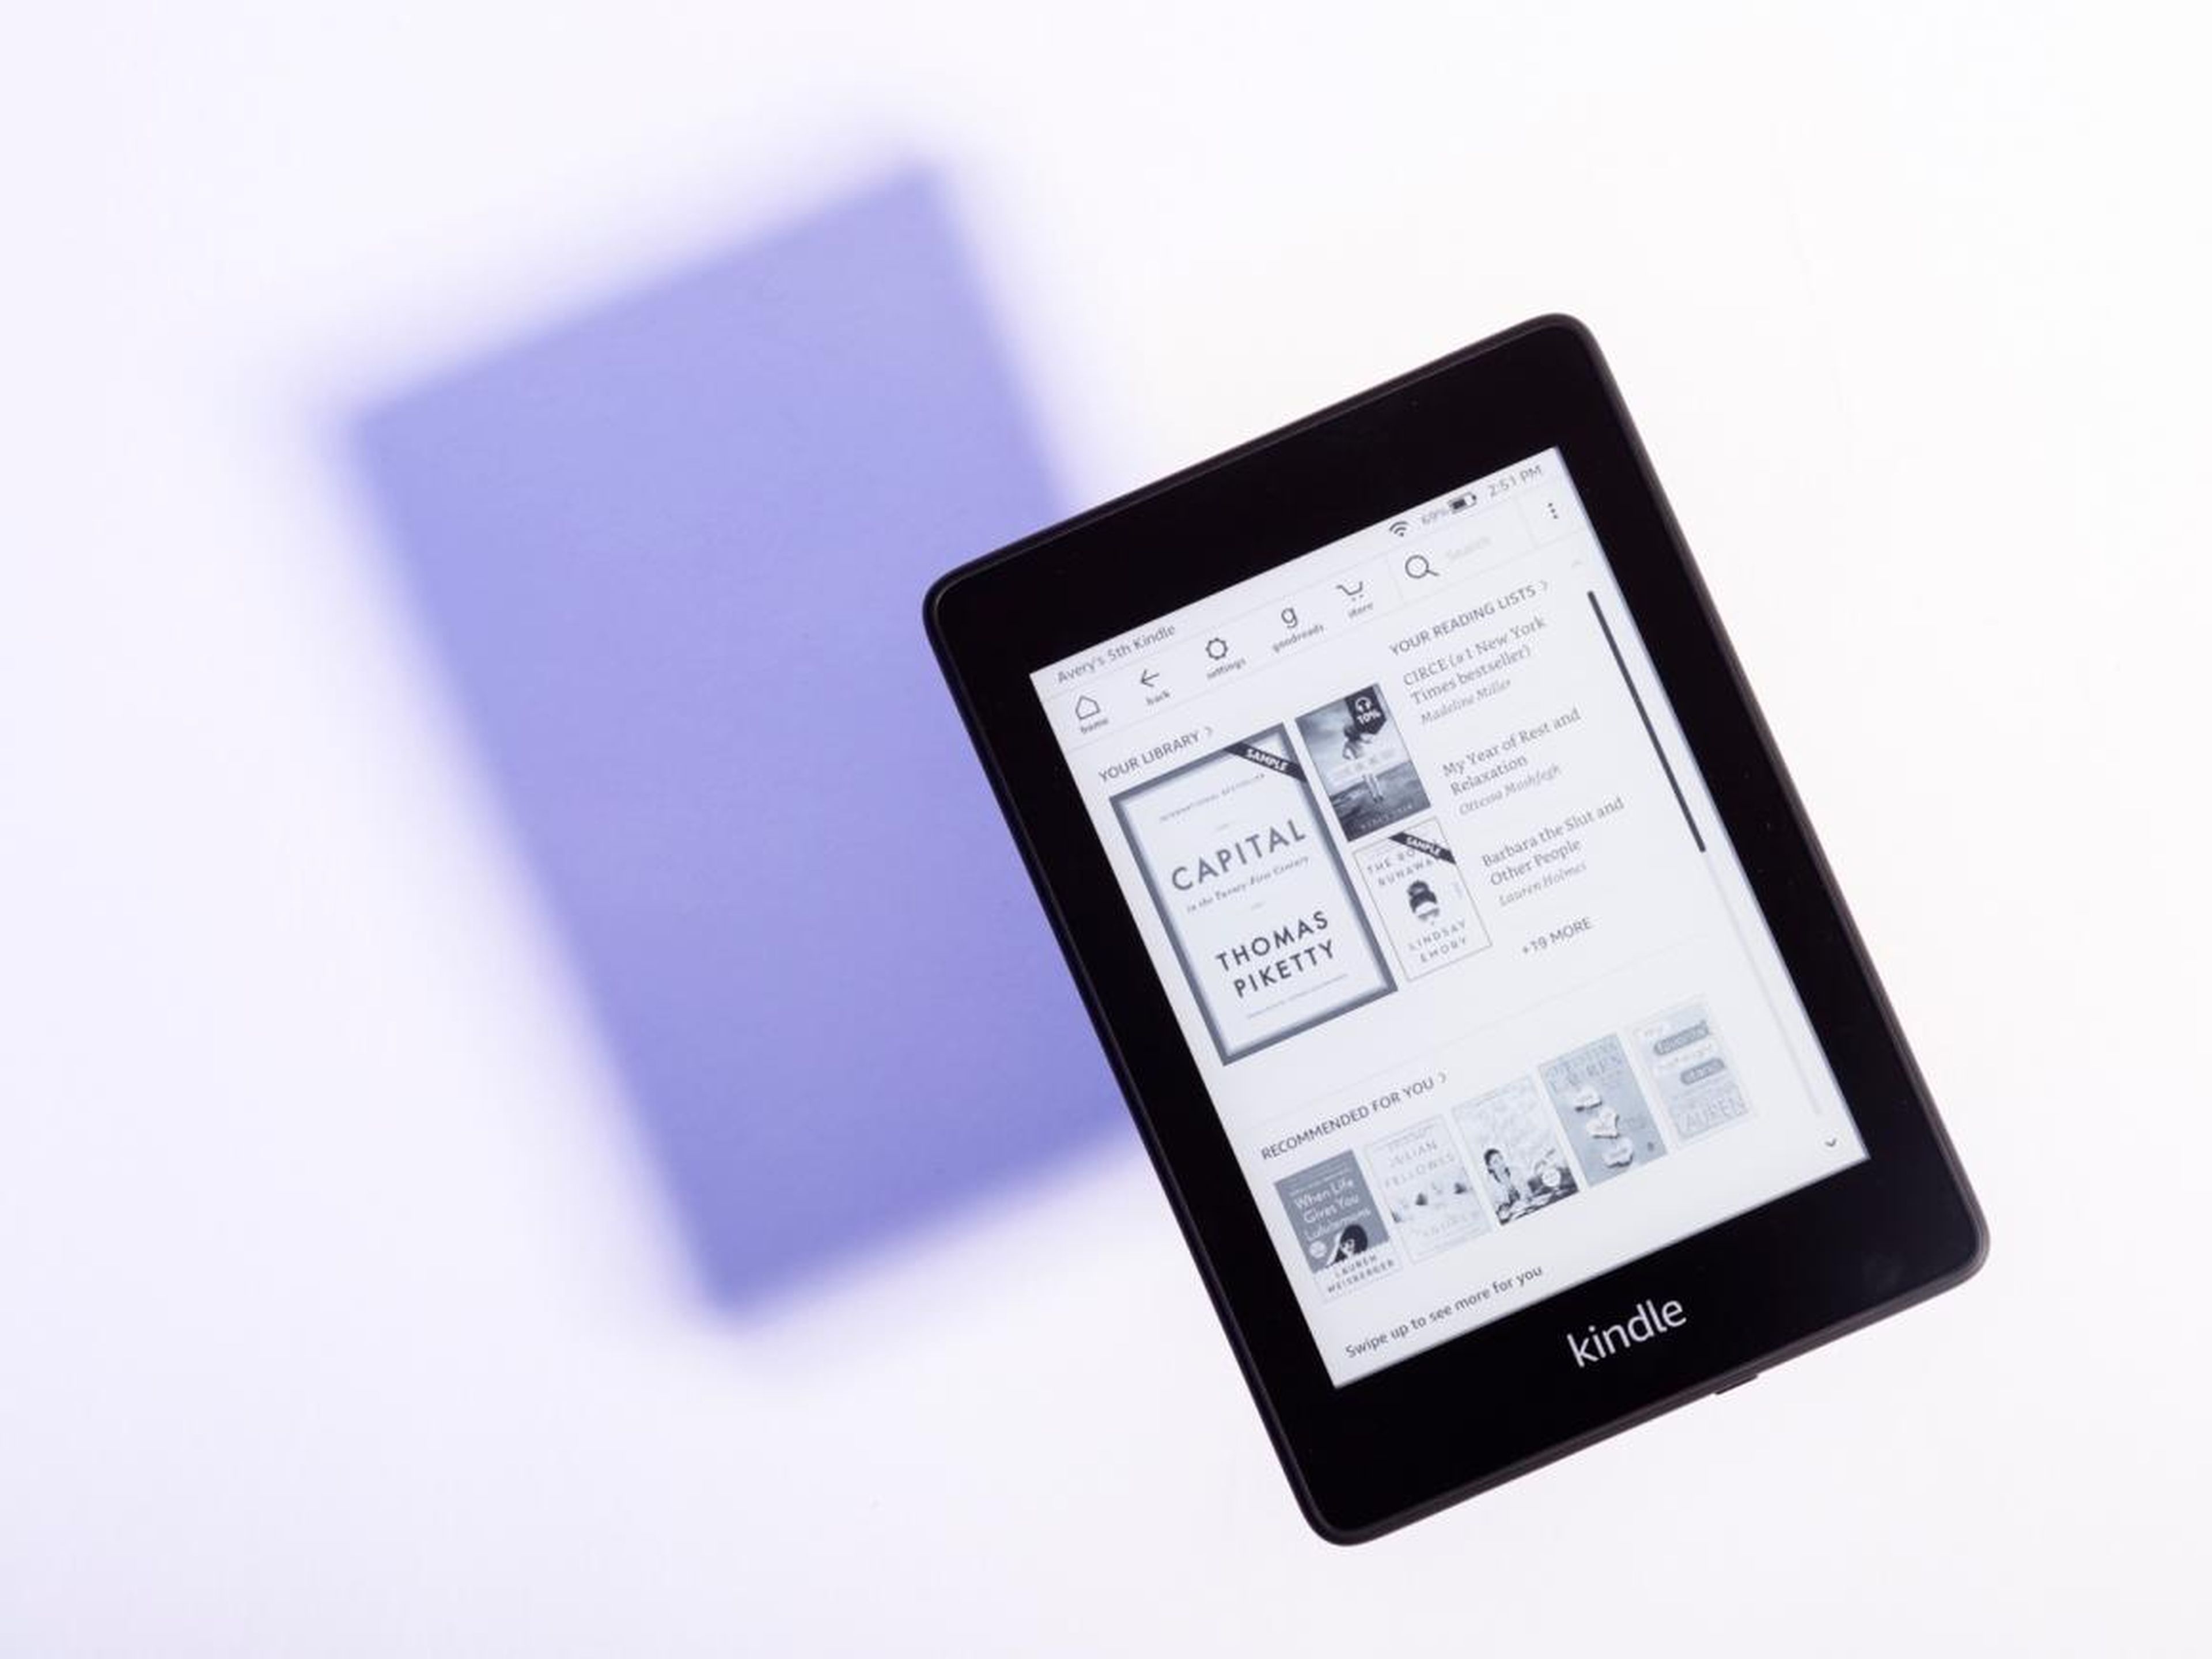 Today, Amazon's Kindle starts at $80 and comes in varying styles and sizes.